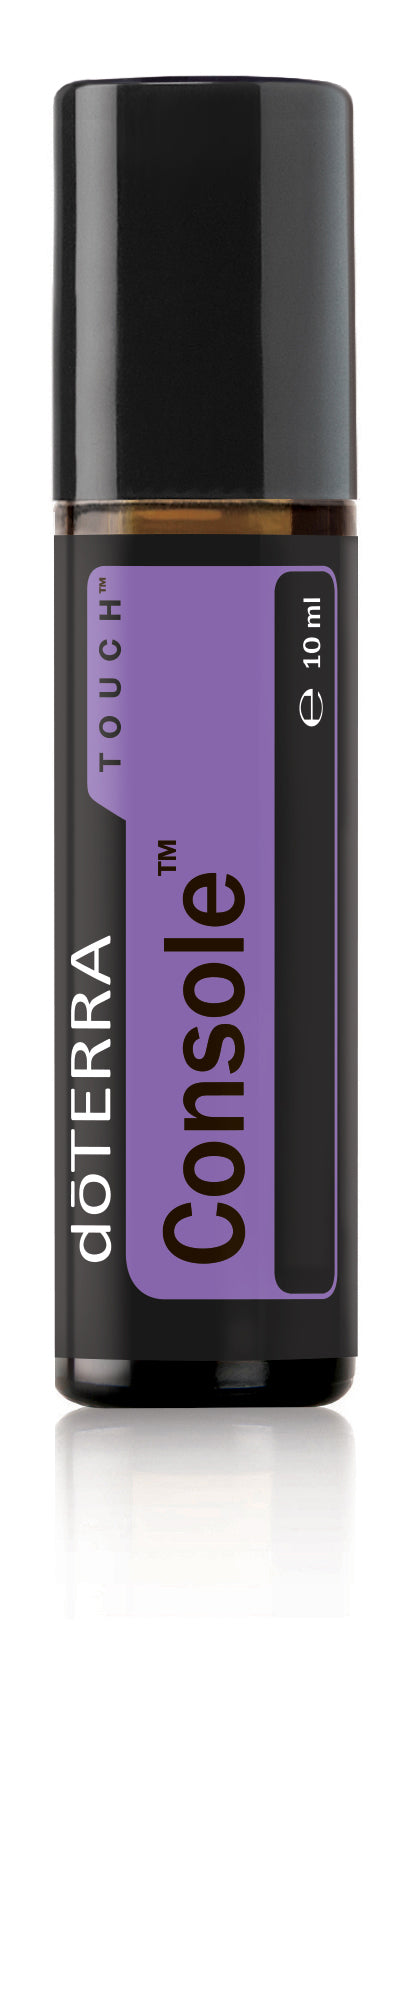 Doterra Console Touch